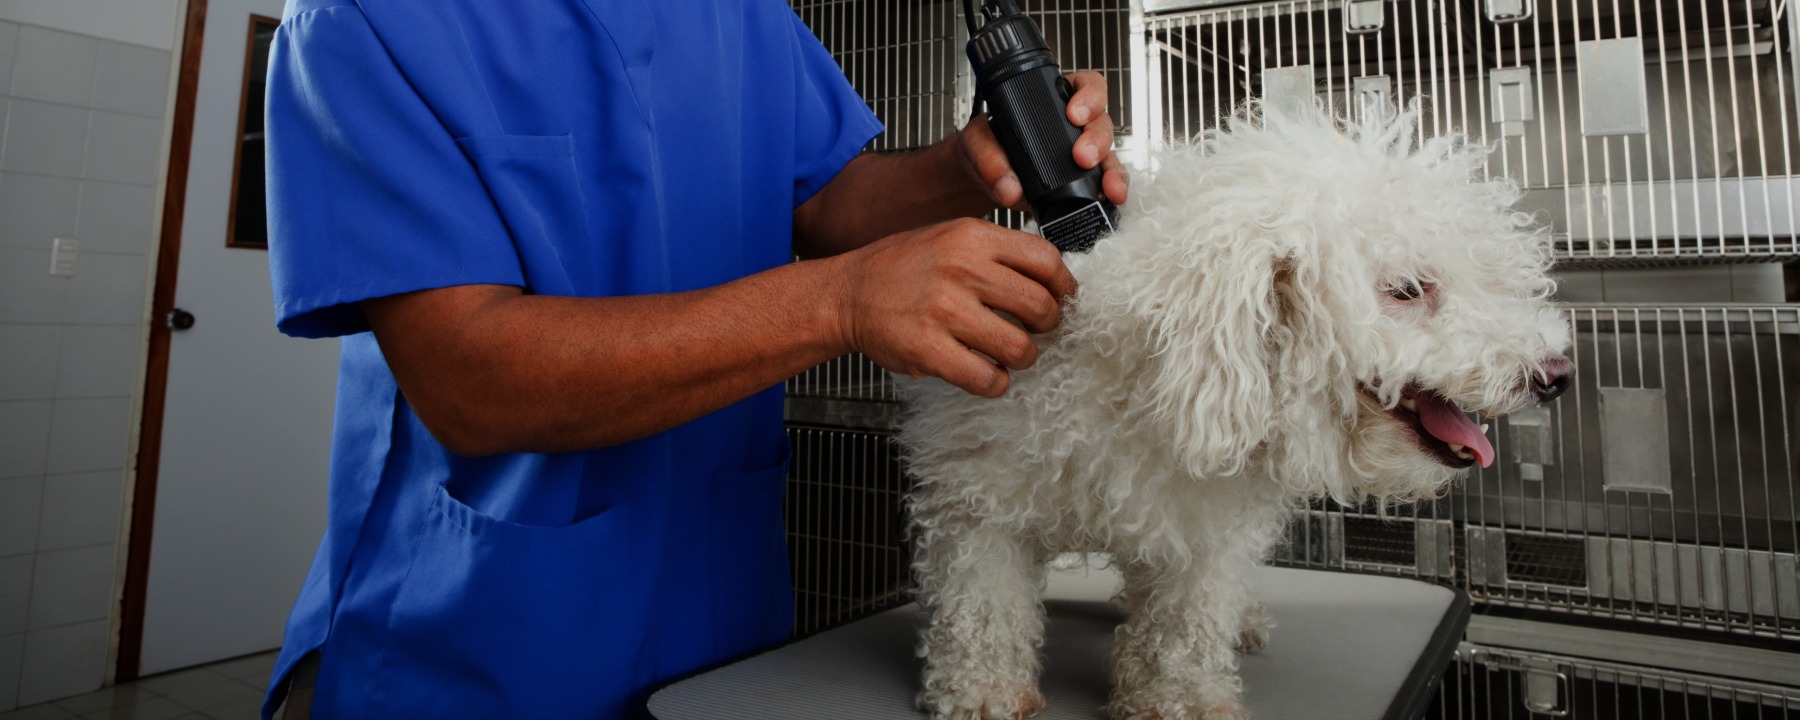 What Should You Look For In a Dog Grooming Course?